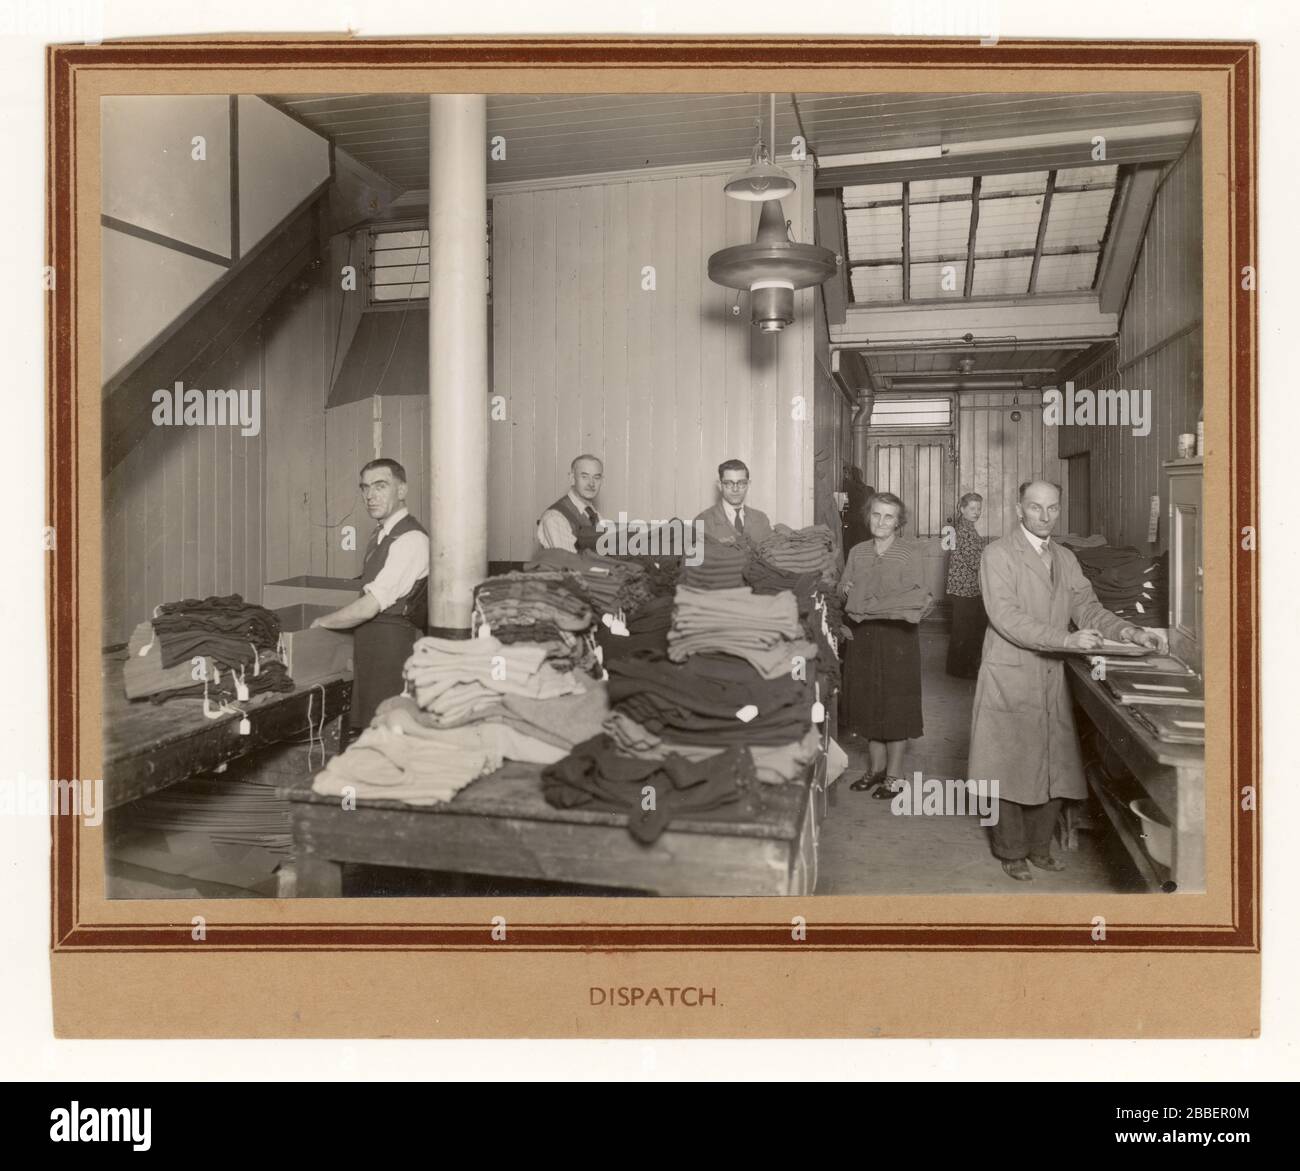 Original early 1900's photo of men at work in the dispatch room of a factory, clothing firm, circa 1930's 1940's, probably Norwich, England, U.K. Stock Photo